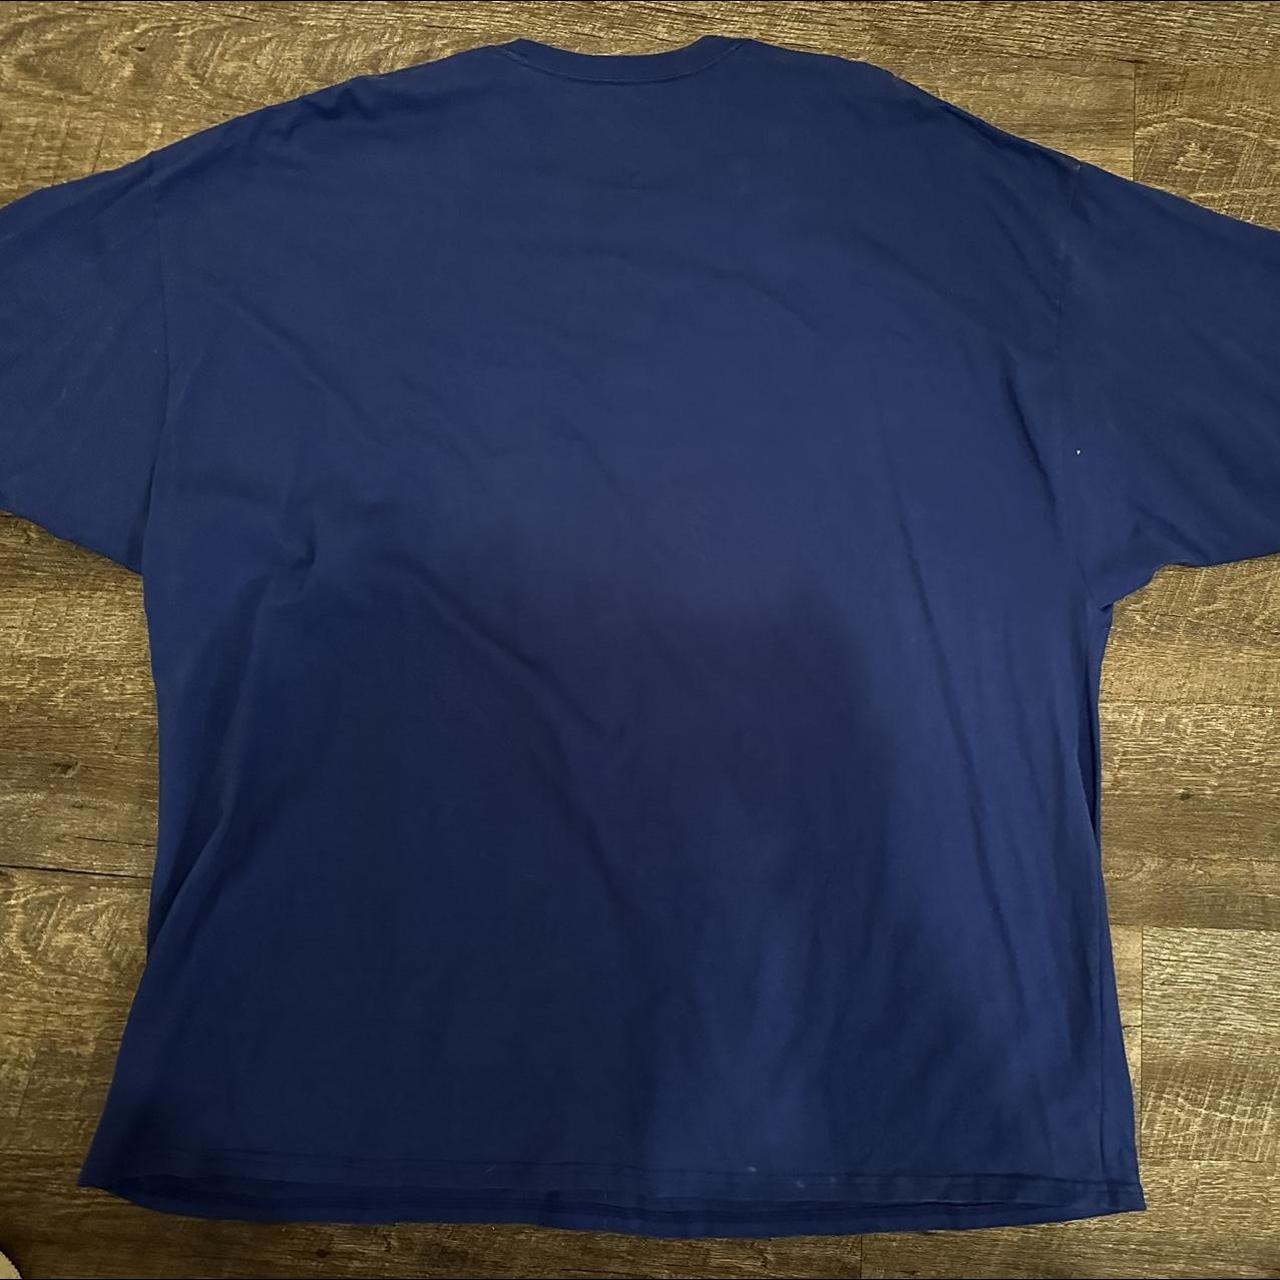 Country Road Men's Blue and White T-shirt (5)